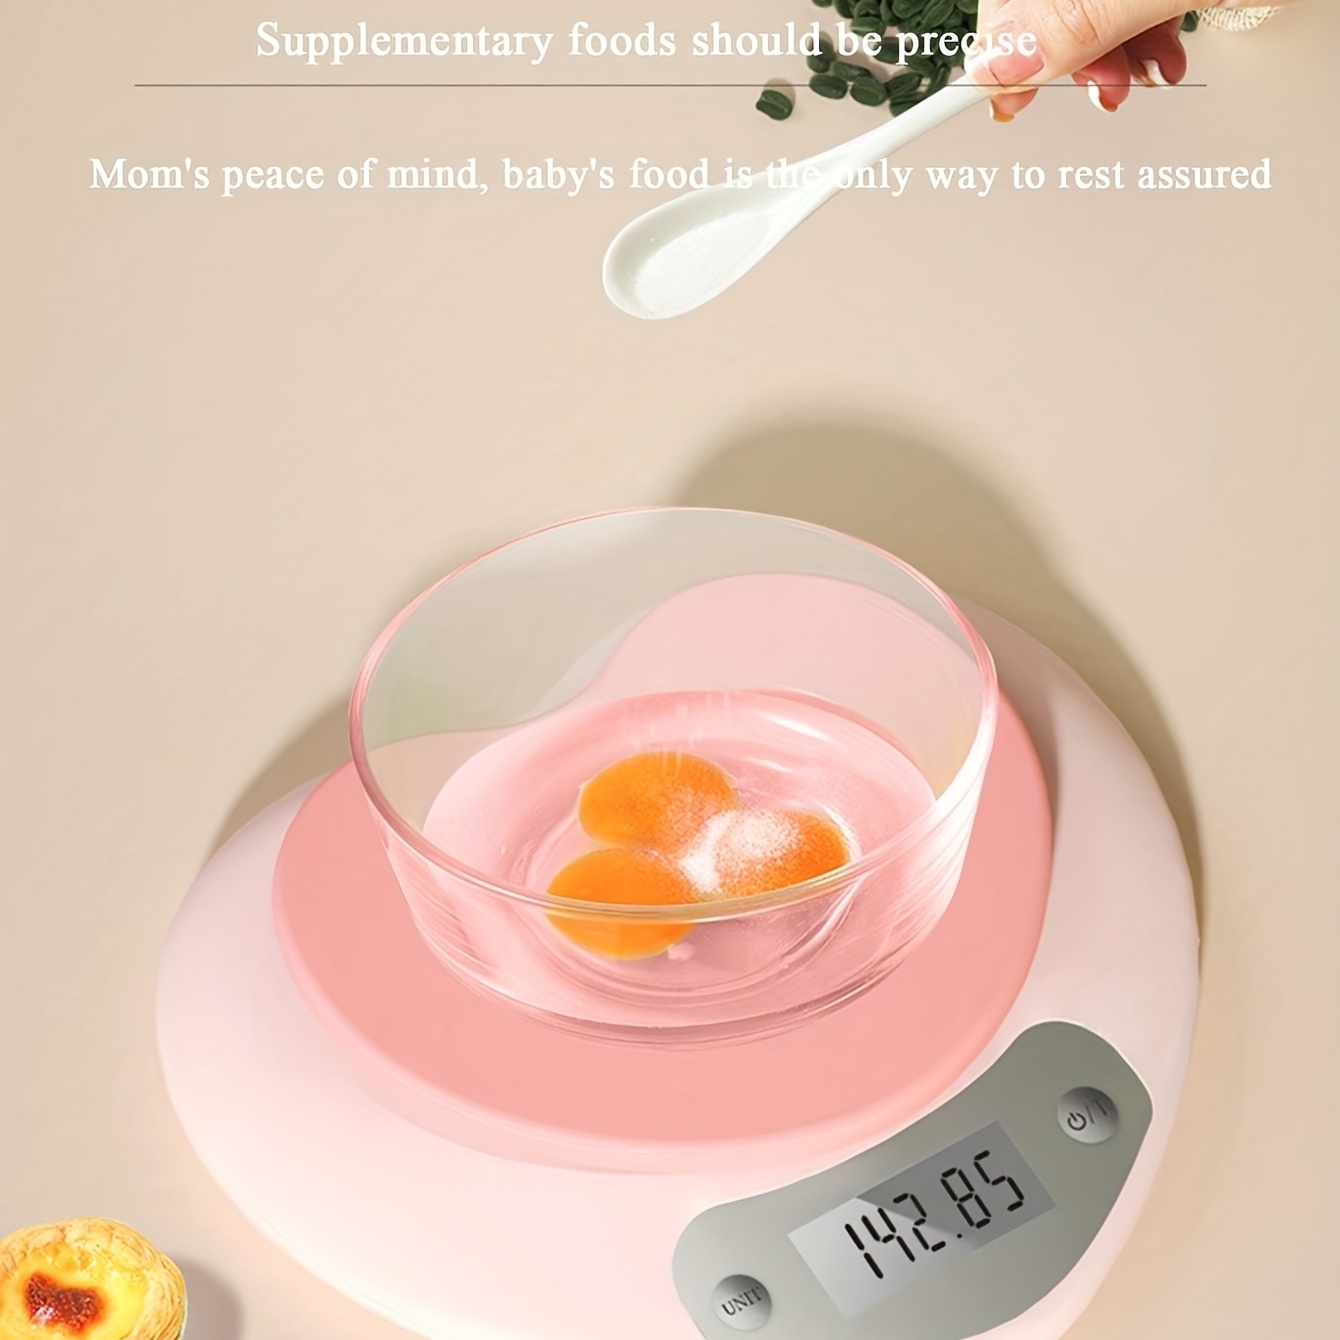 1pc Heart Shaped Kitchen Baking Scale Electronic Food Scale, Pink